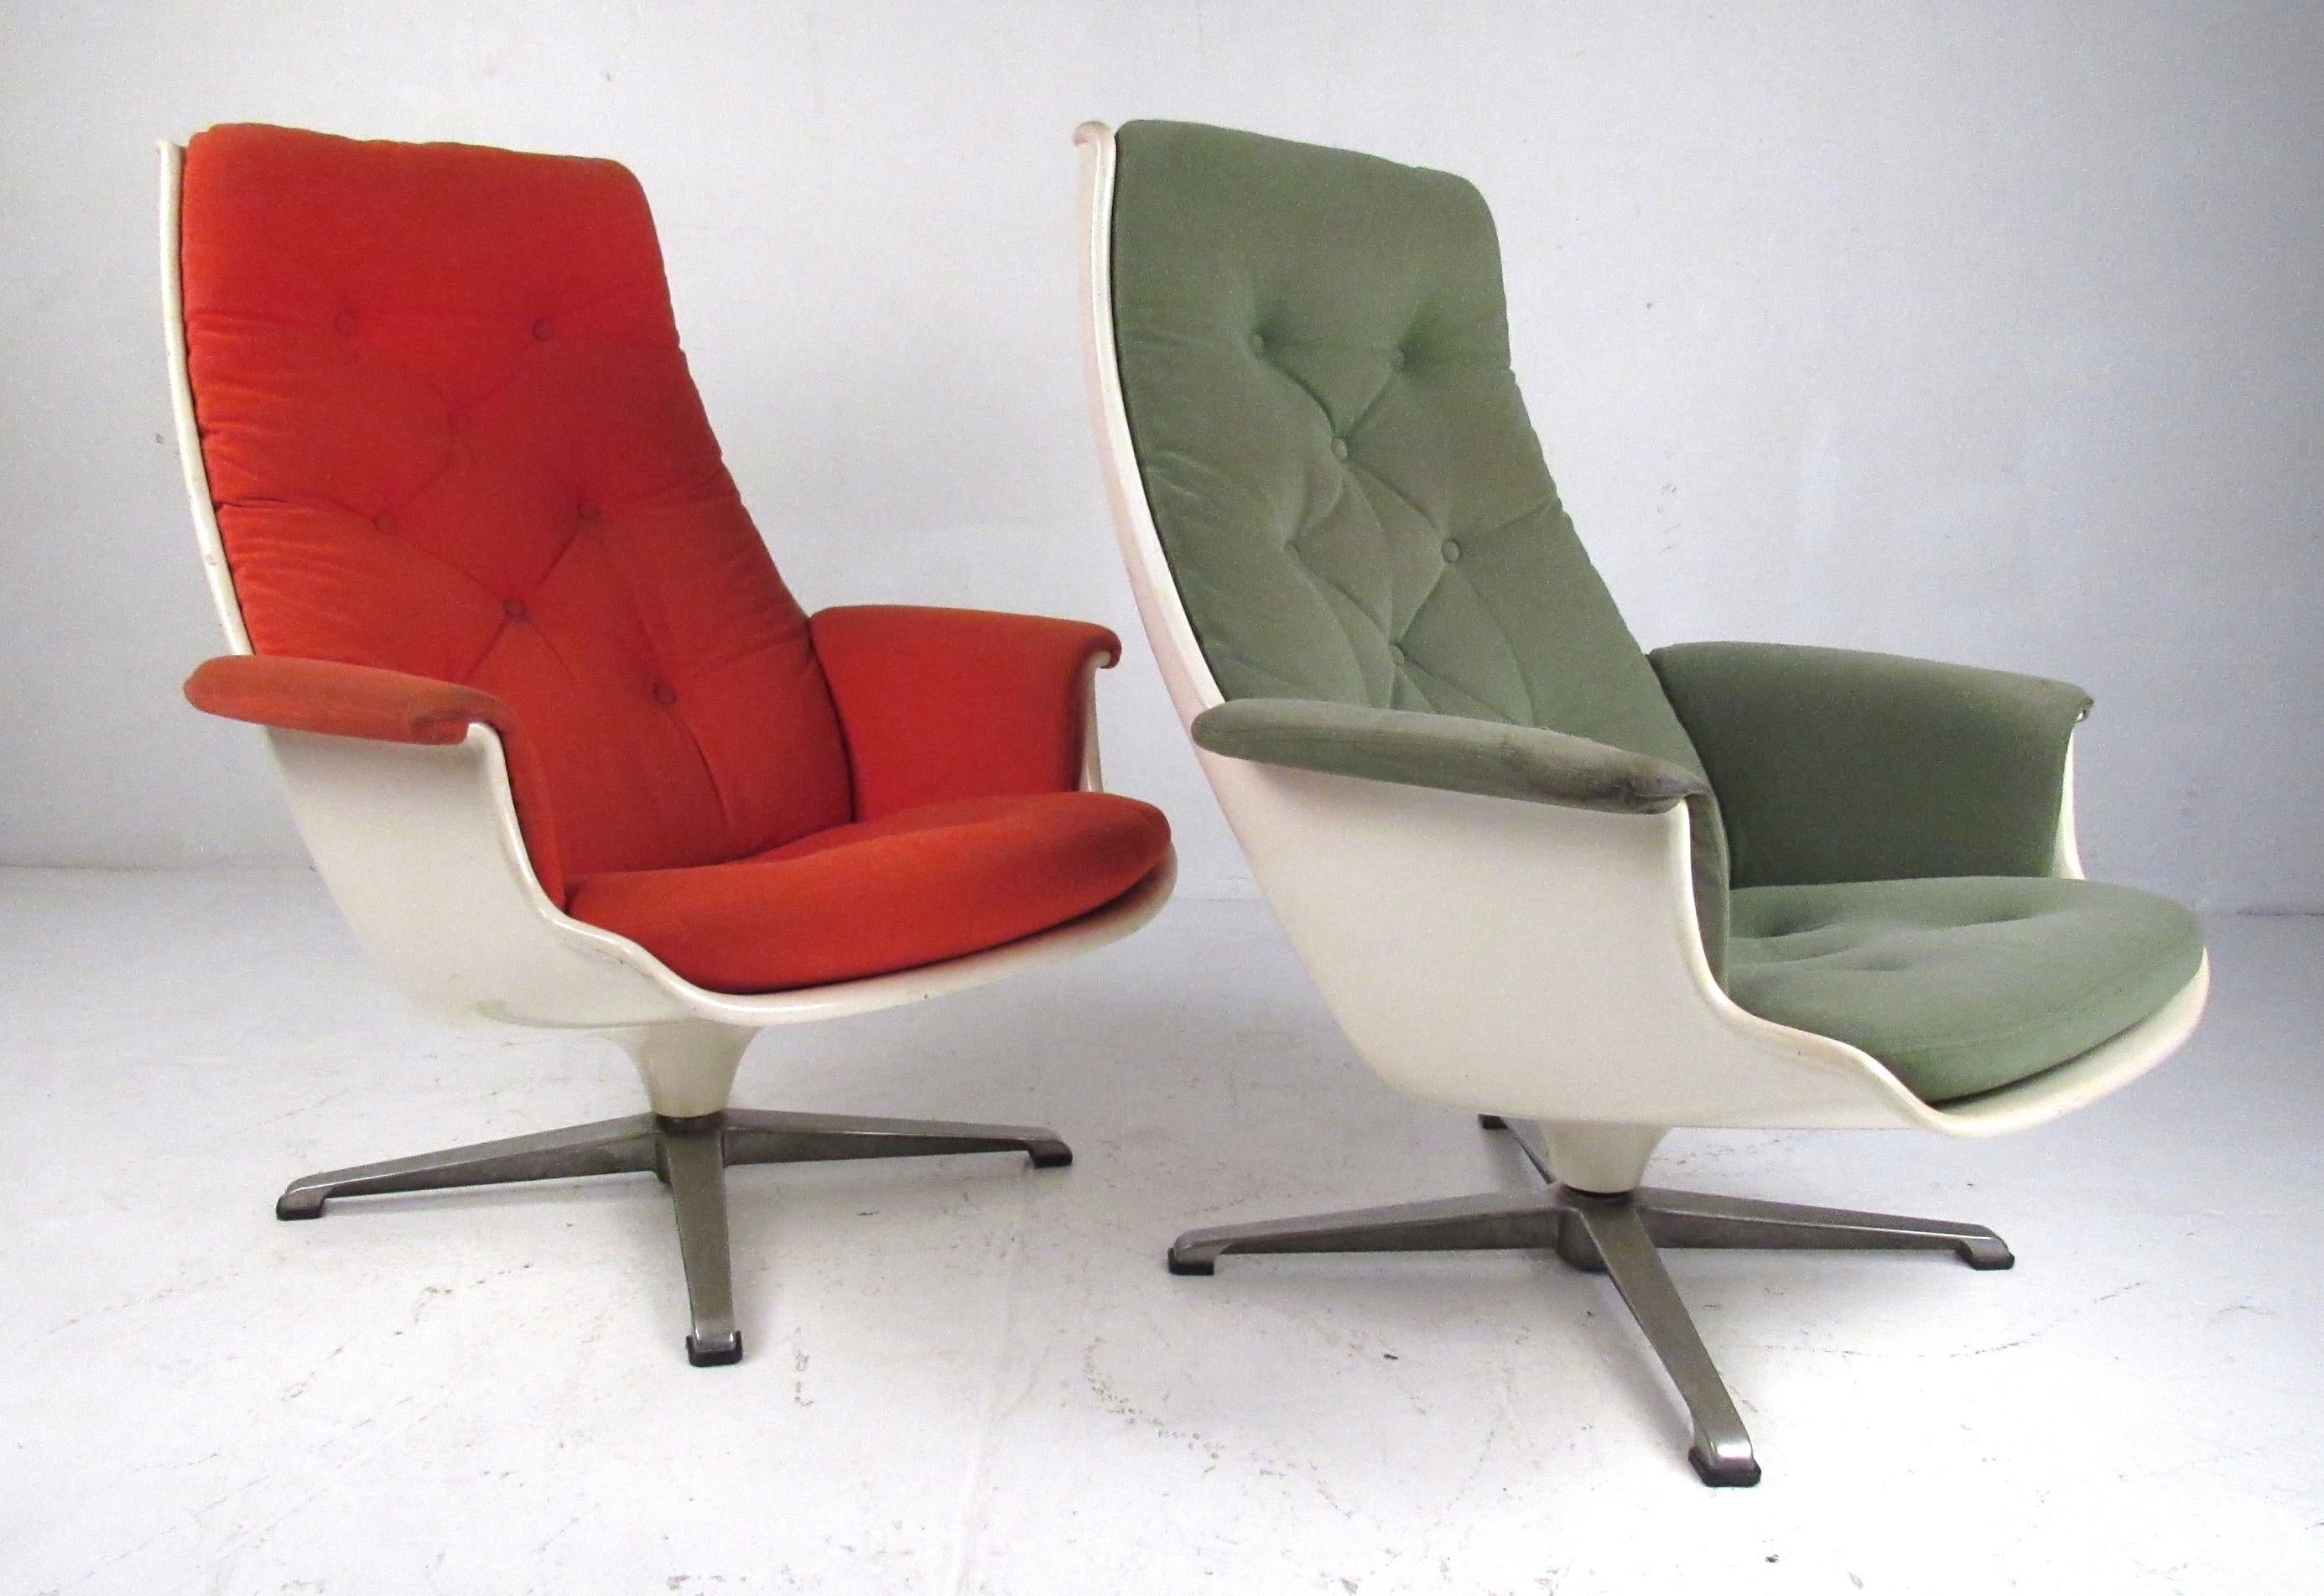 Matching pair of vintage fiberglass shell lounge chairs on swivel bases. Reminiscent of the classic Eames lounge, these stylish chairs are very comfortable and will compliment any home or office environment. Please confirm item location (NY or NJ)